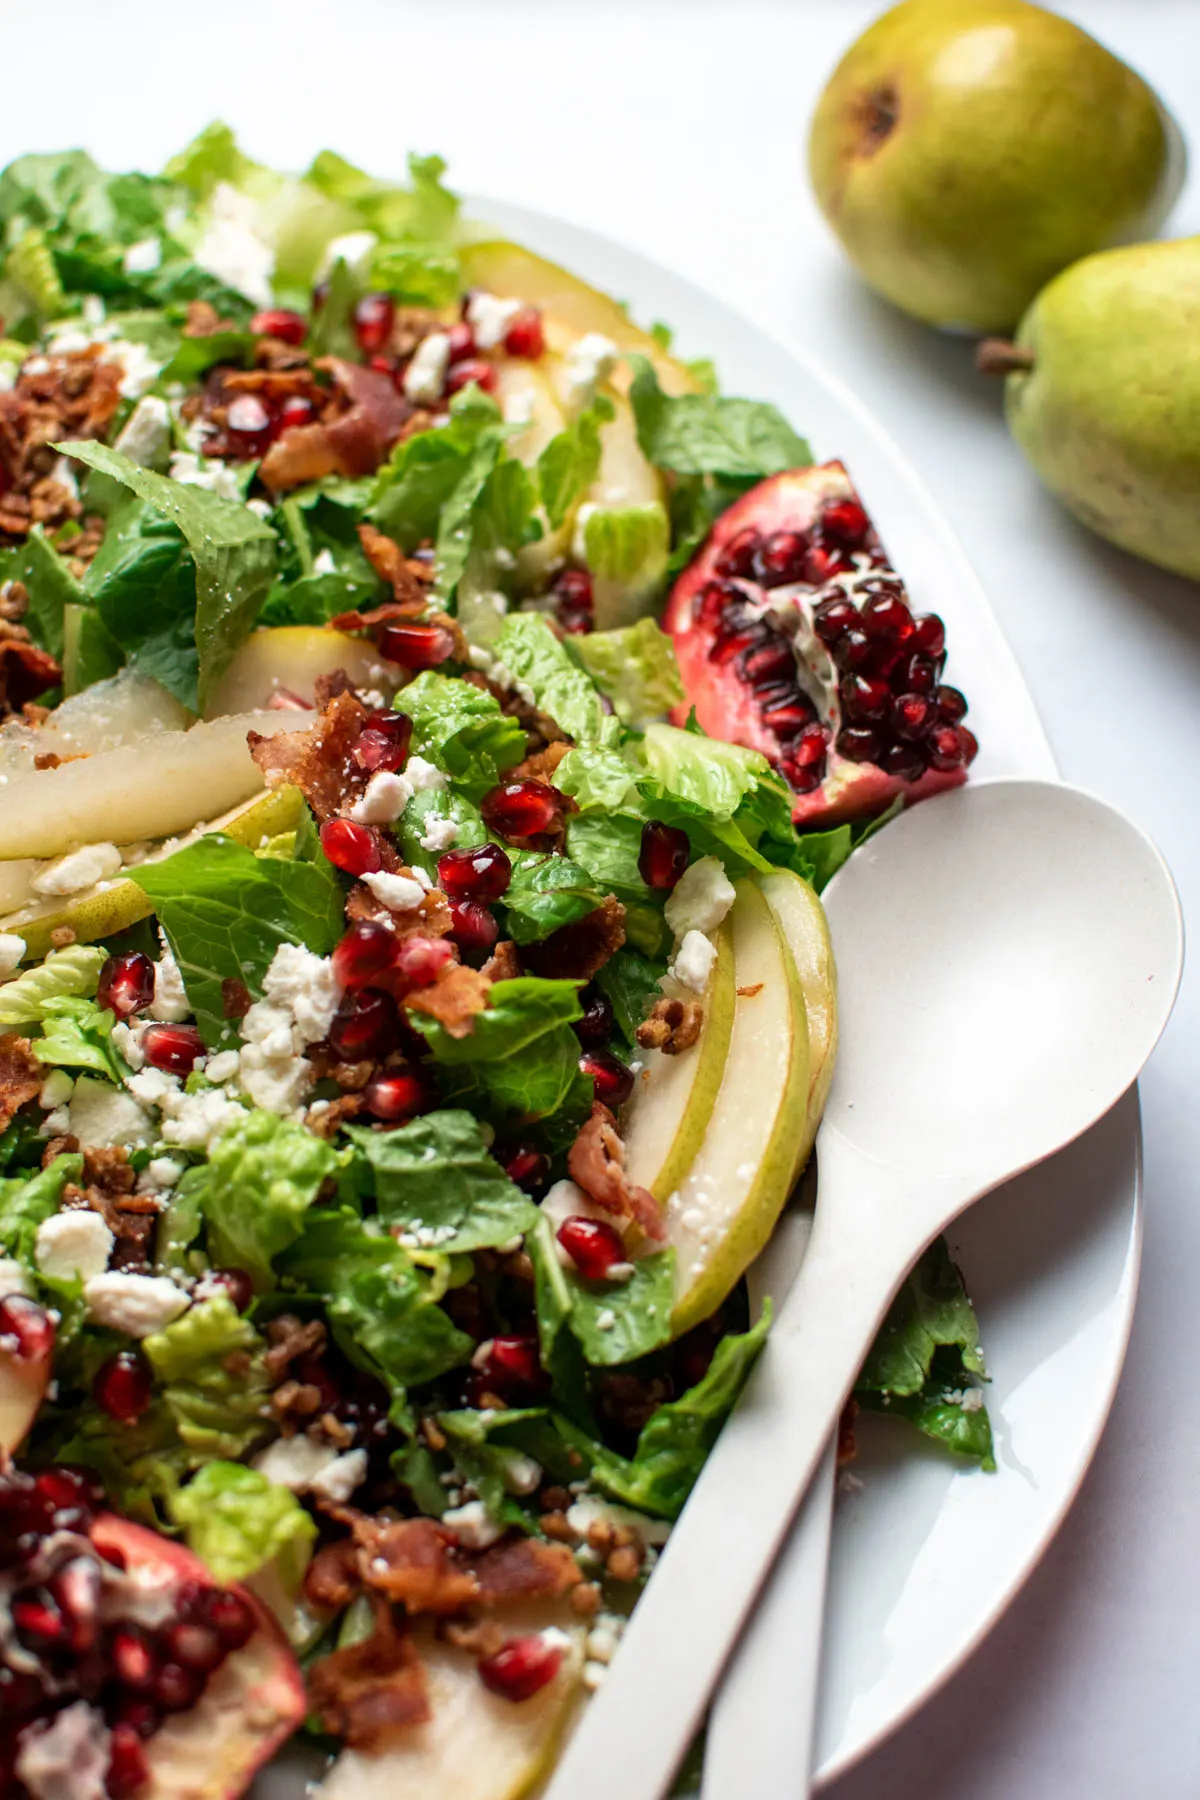 Green salad with pomegranate seeds and pears on white platter with serving utensils.